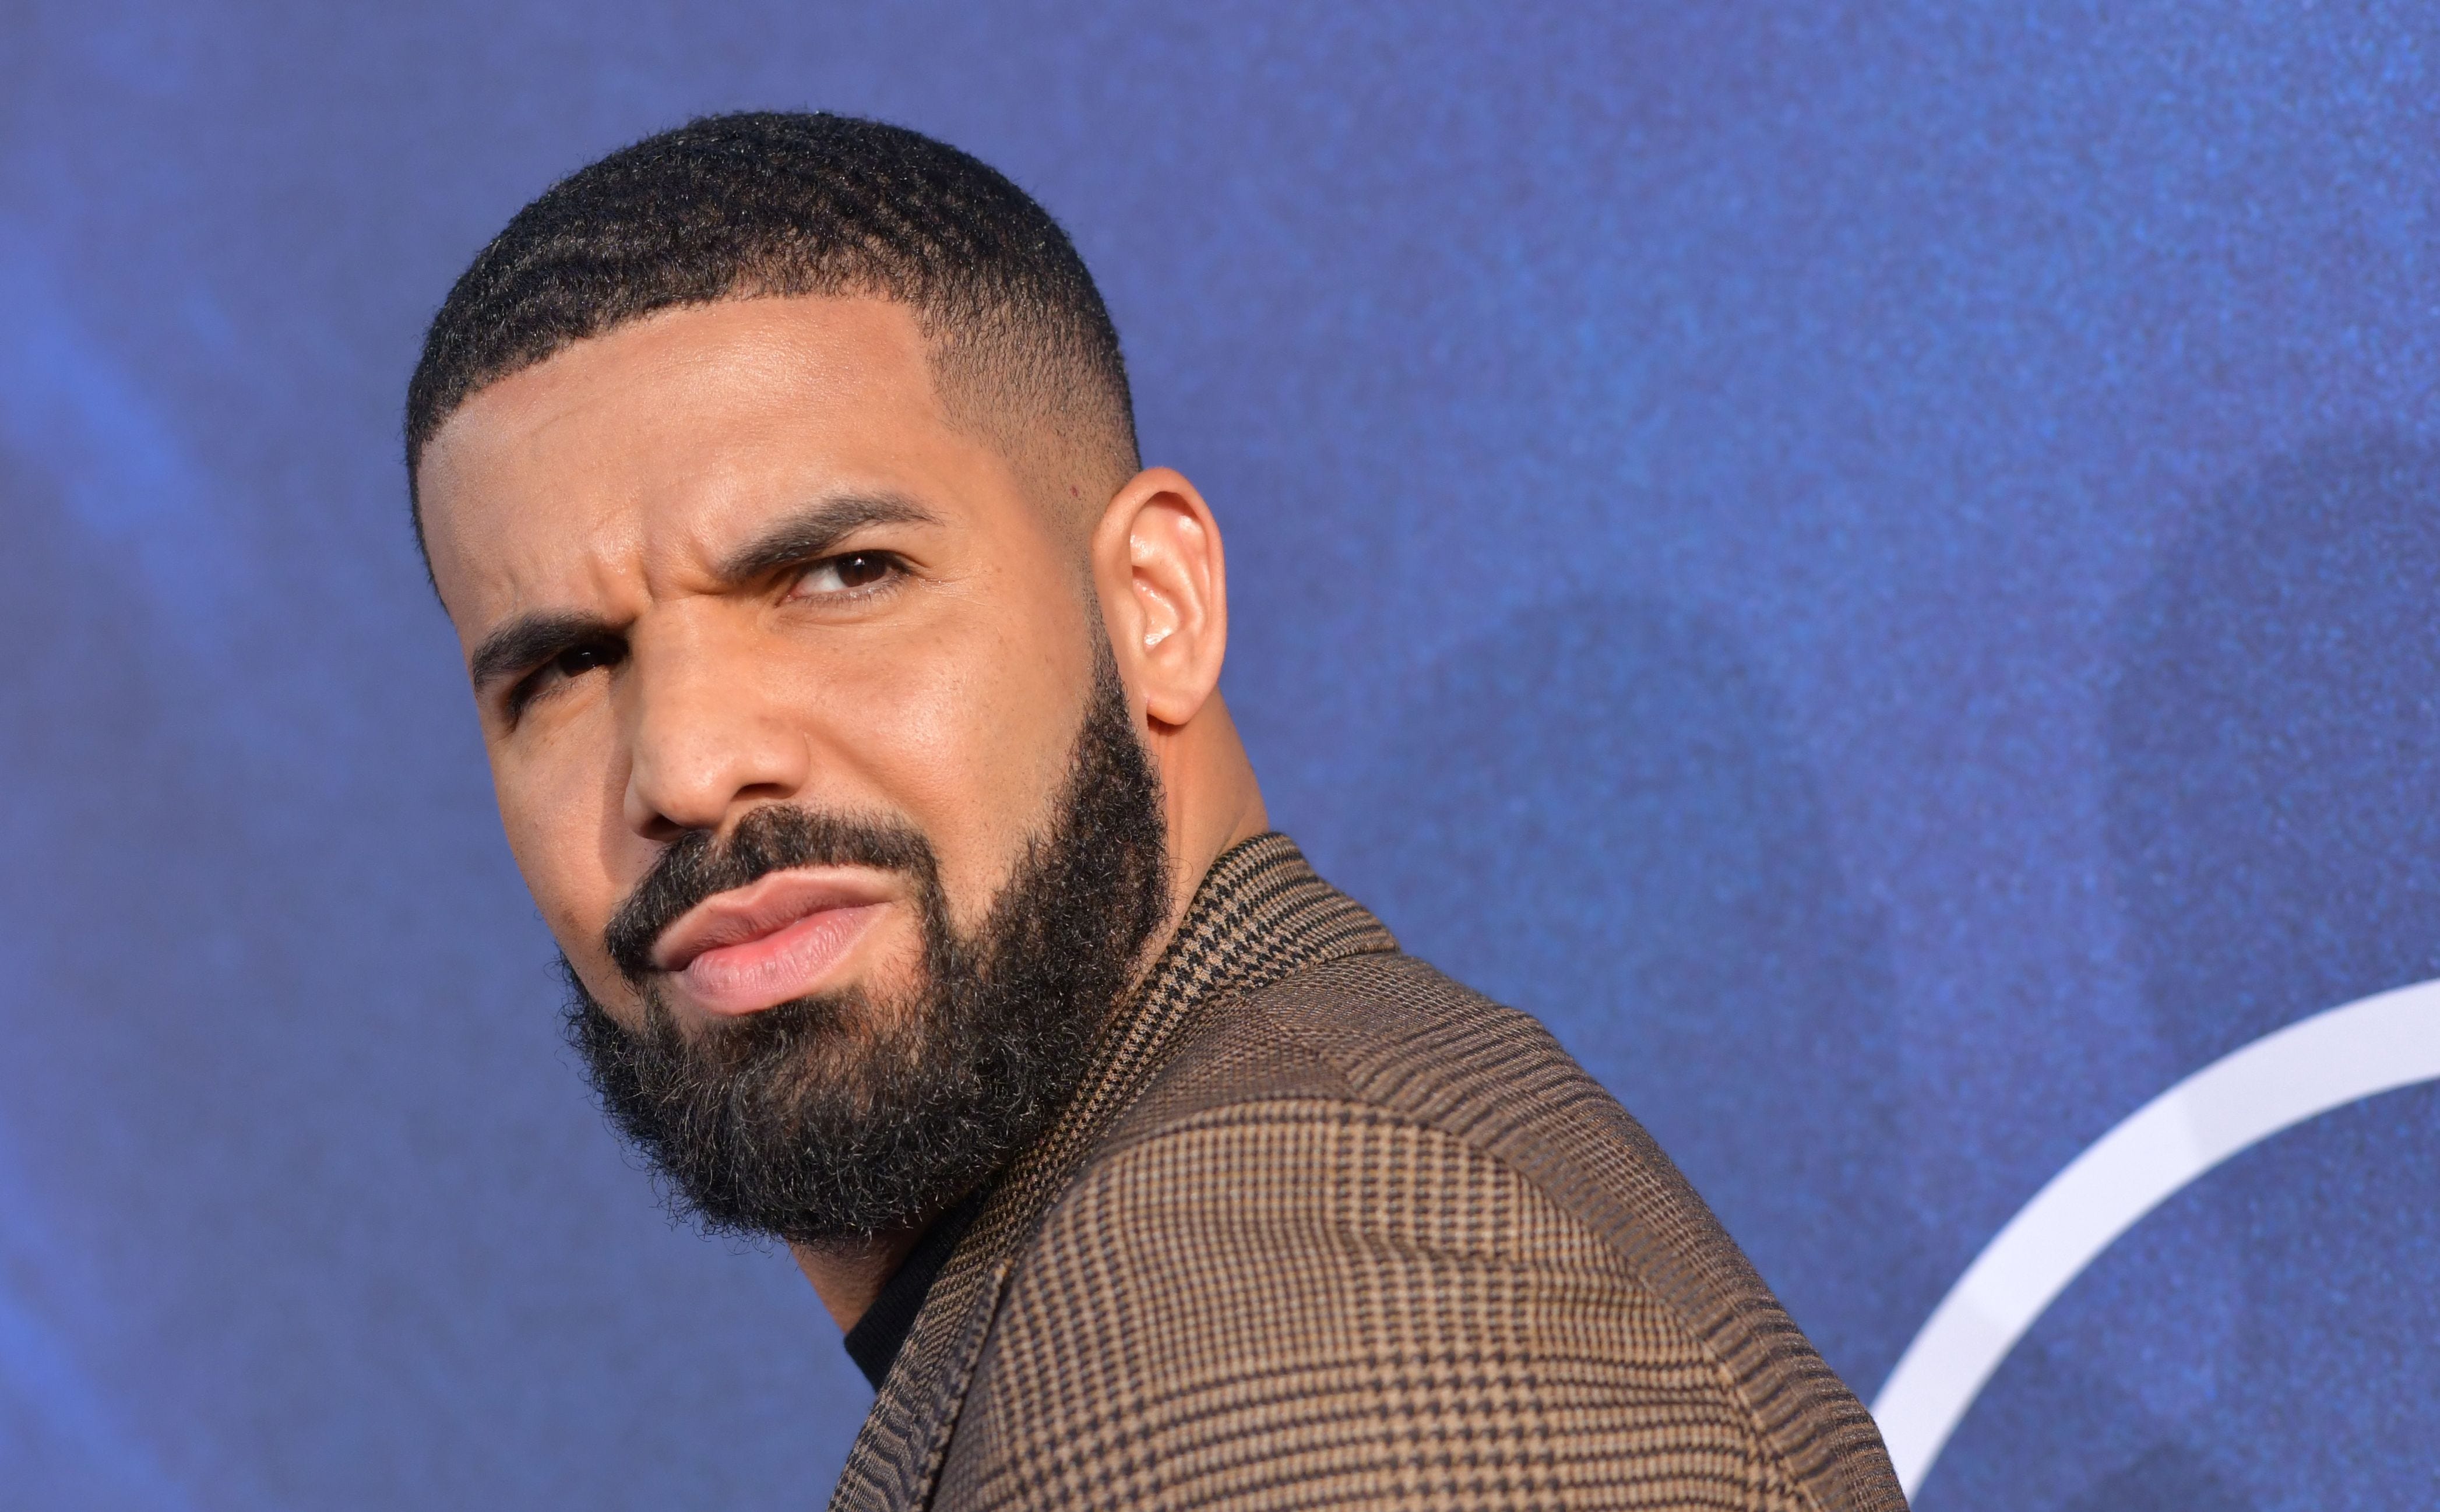 drake says he'd be arrested if he committed sexual assault. statistically that's not true